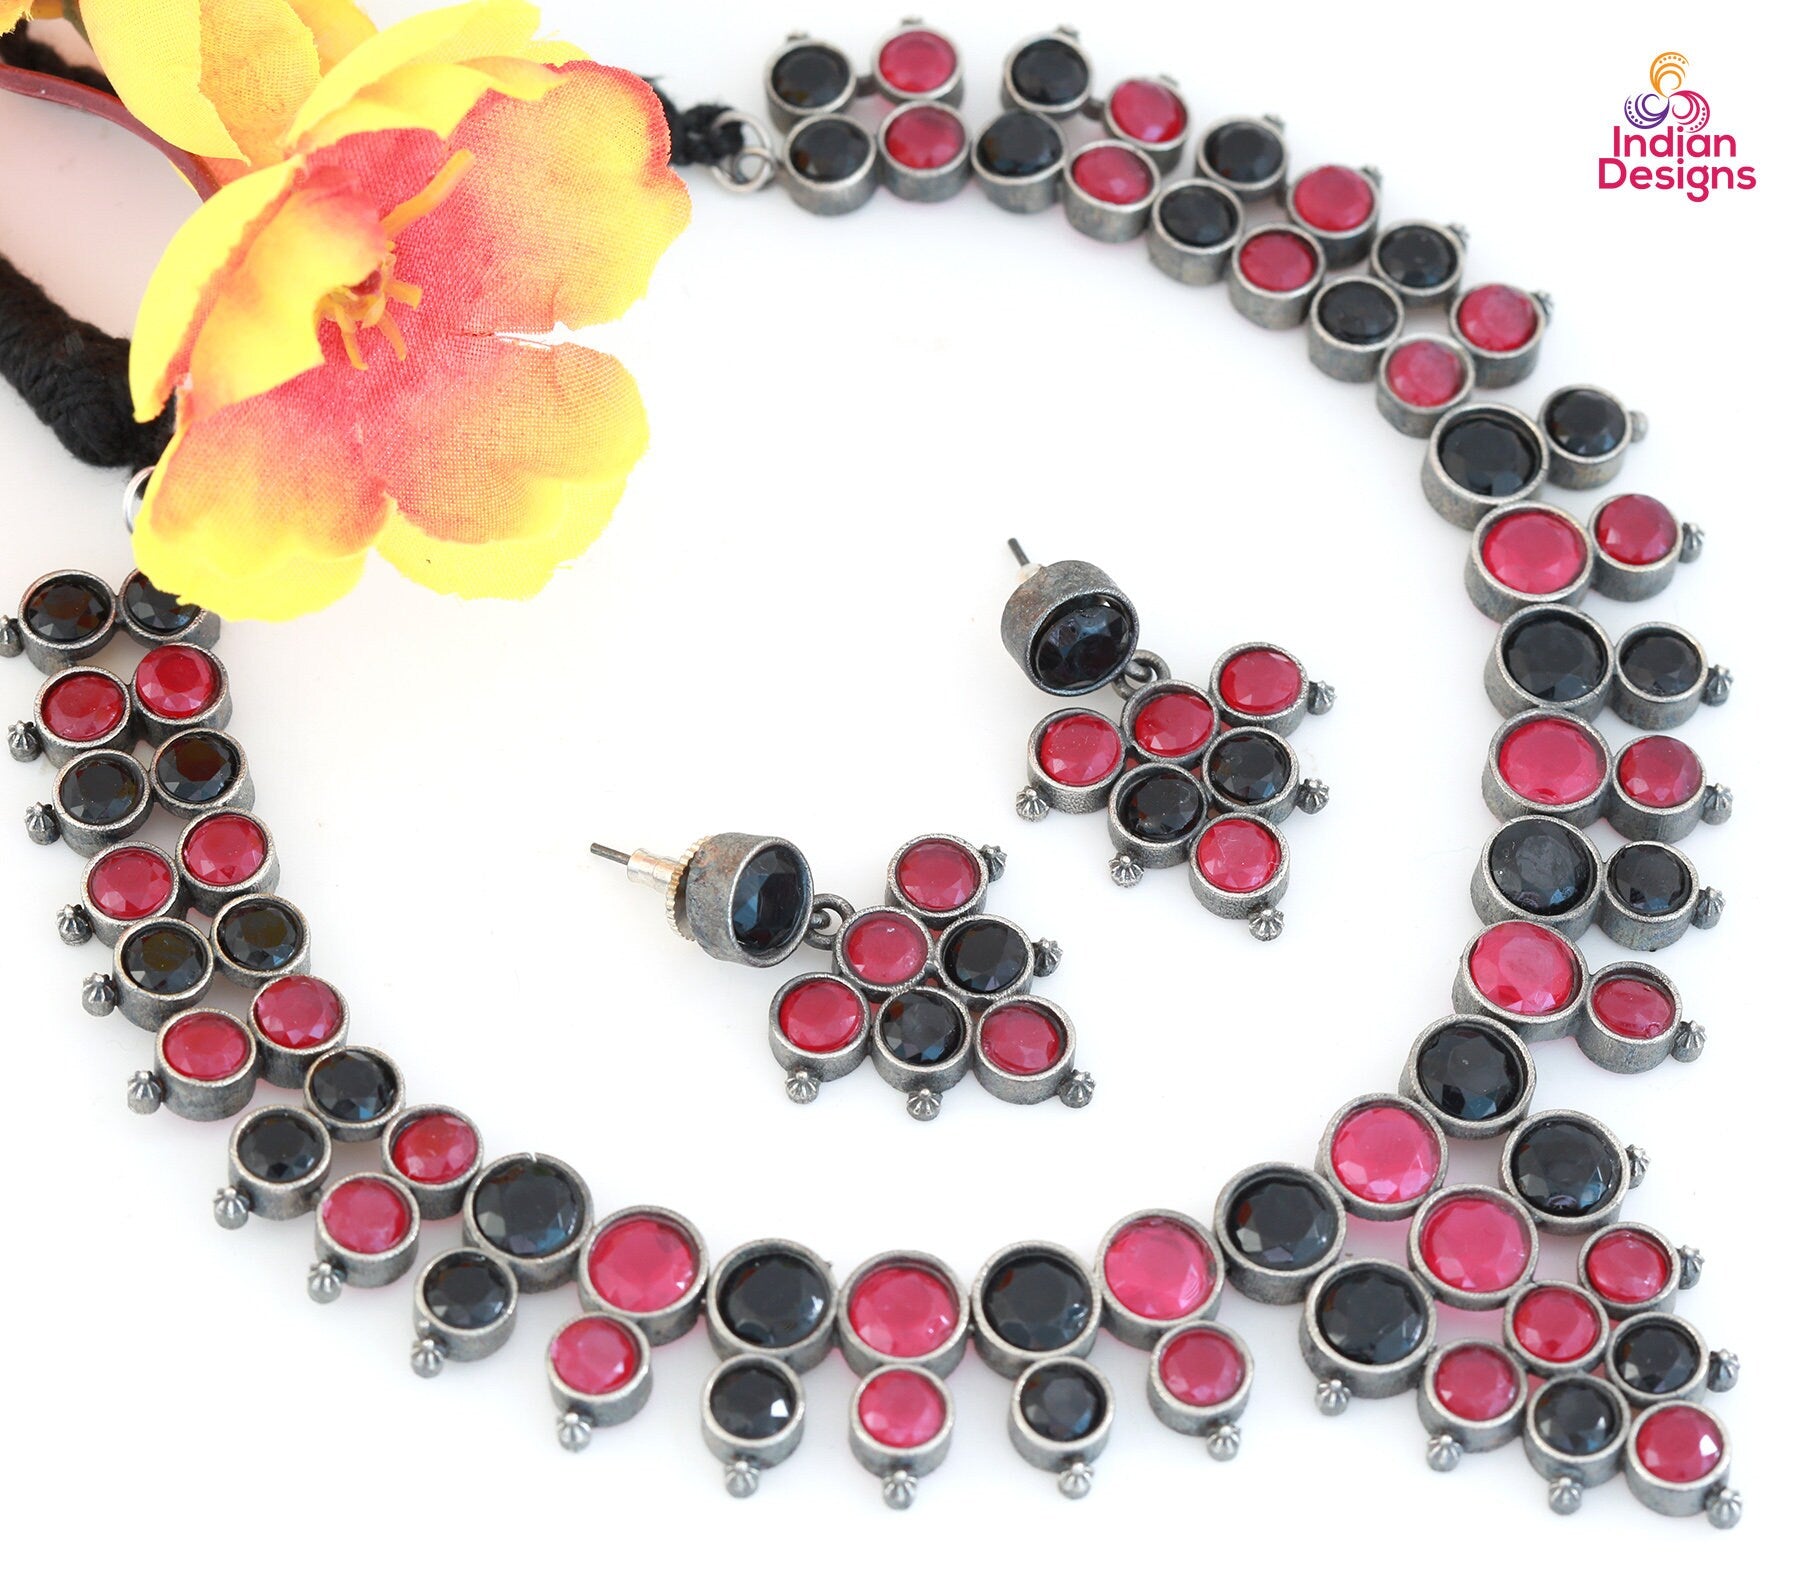 Antique silver choker at Low price | Indian Oxidized Silver Necklace with Color stones | German silver choker necklace